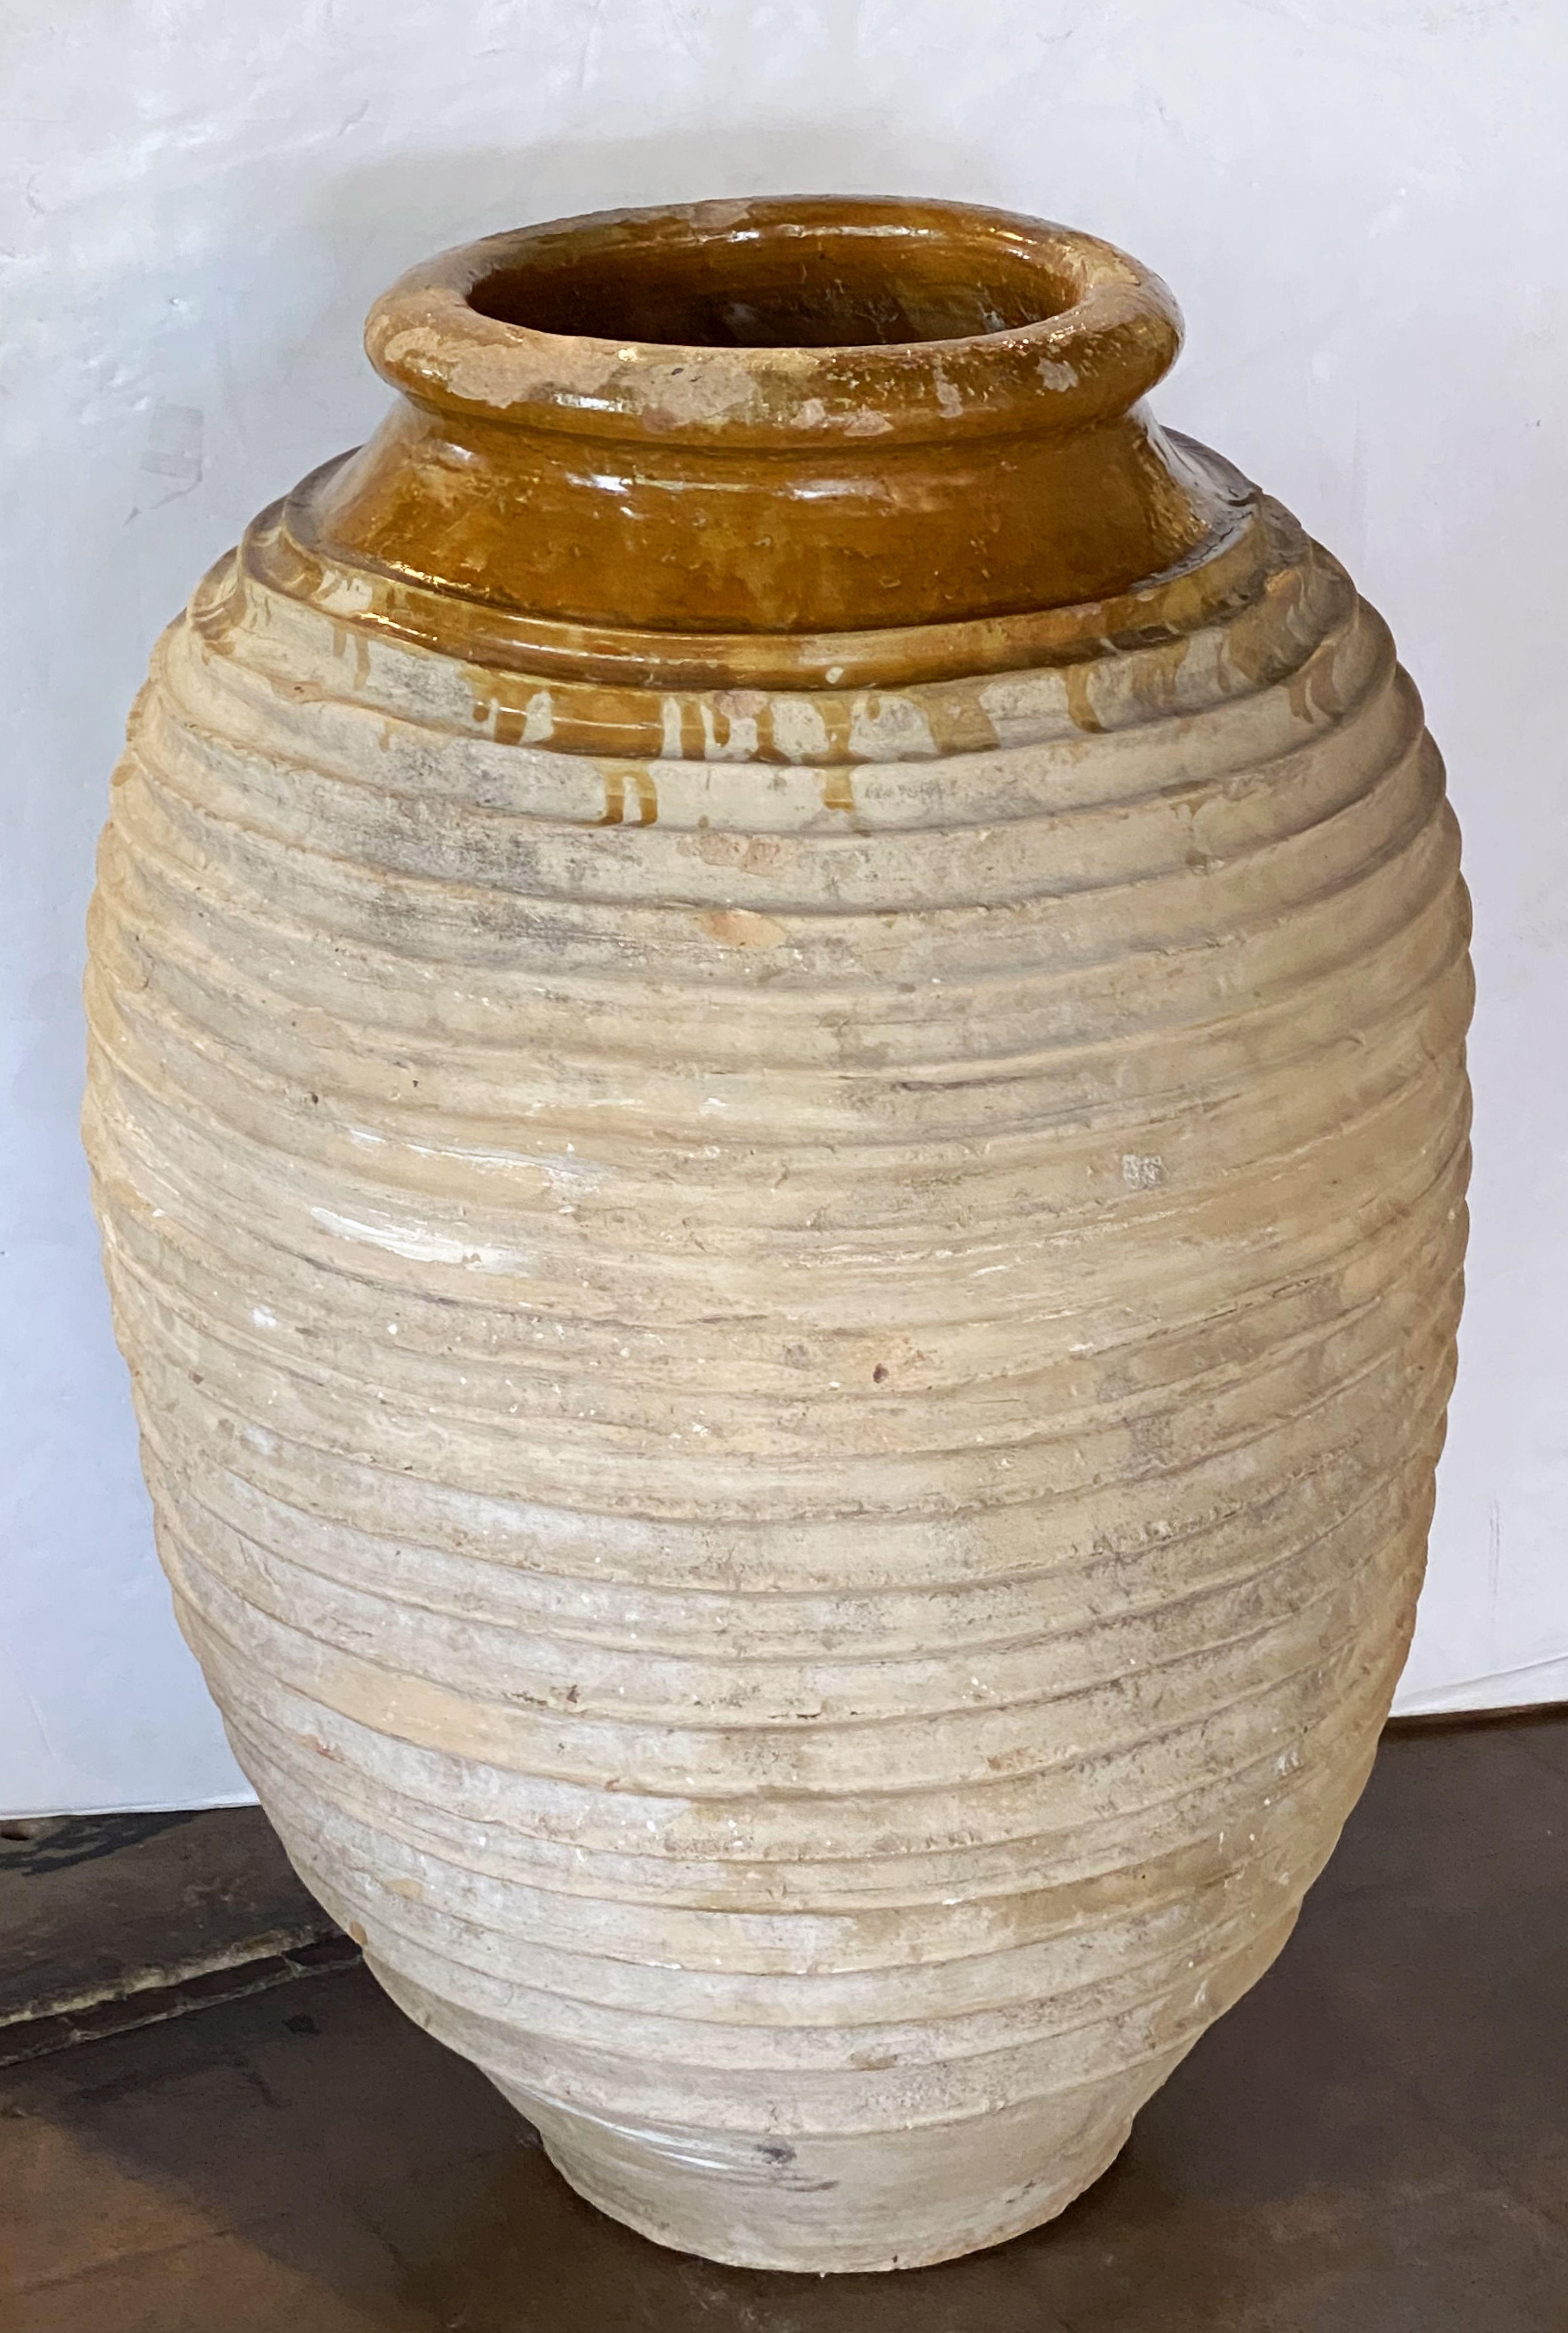 A handsome large Greek garden urn pot (Amphora) or oil jar, featuring a glazed top over a ridged, cylindrical body and functional as an indoor or outdoor garden ornament or planter.

Other similarly styled jars and pots available.

This pot's